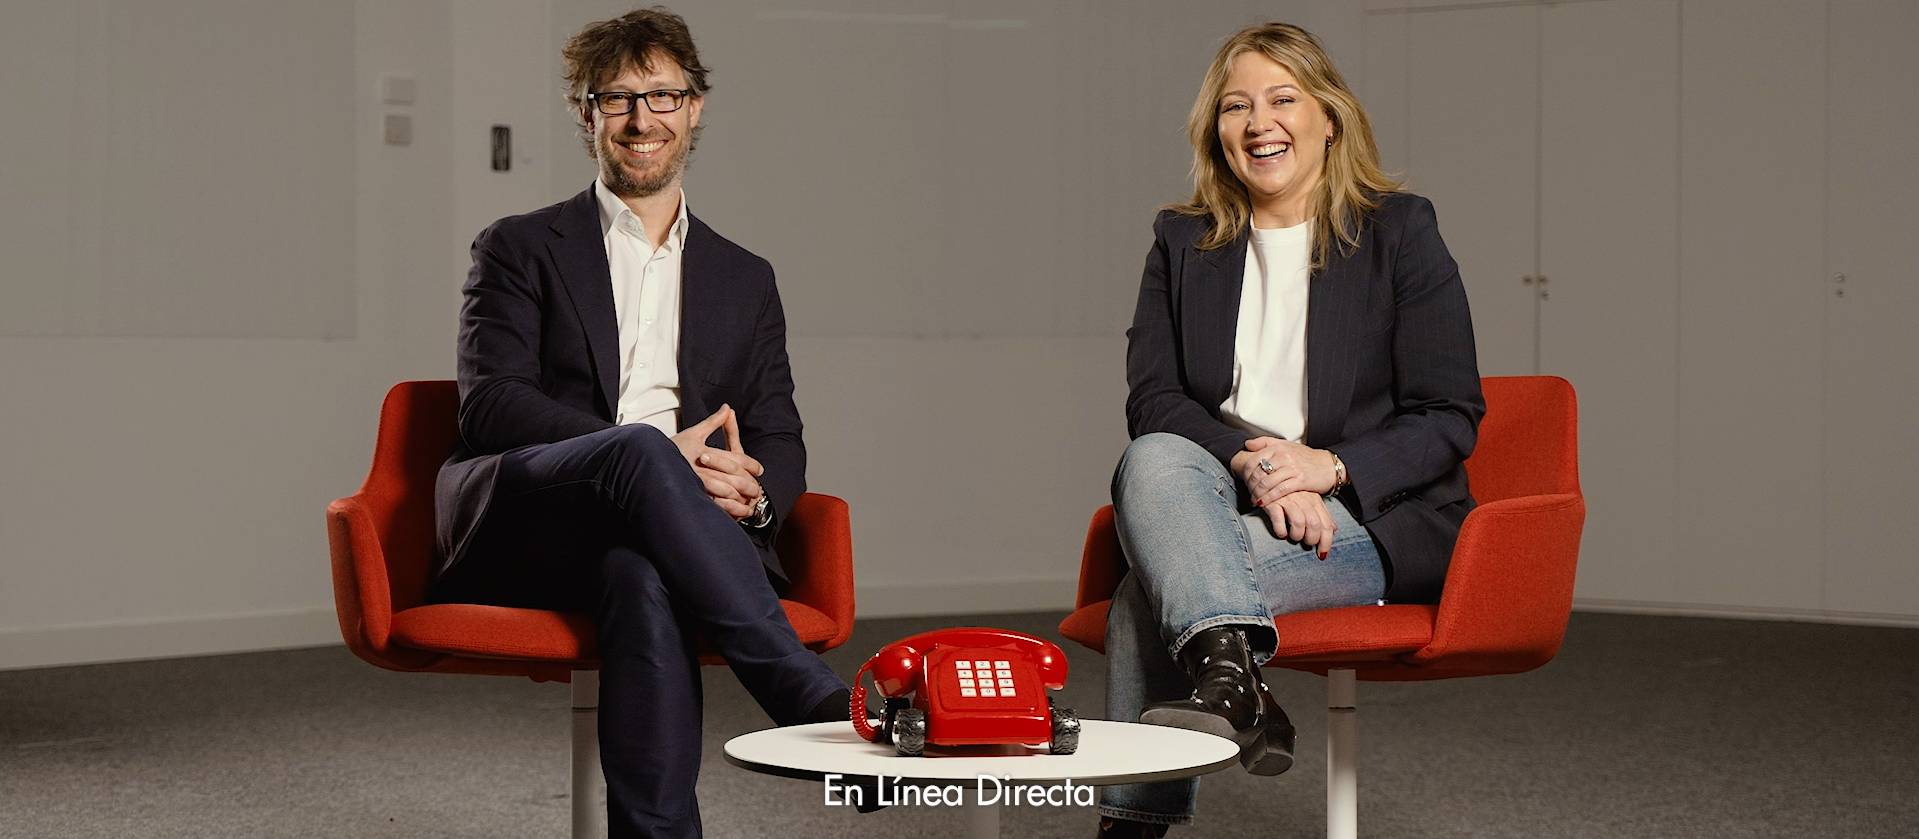 Juan Luis and Susana are from the company's Marketing department and are the protagonists of this chapter